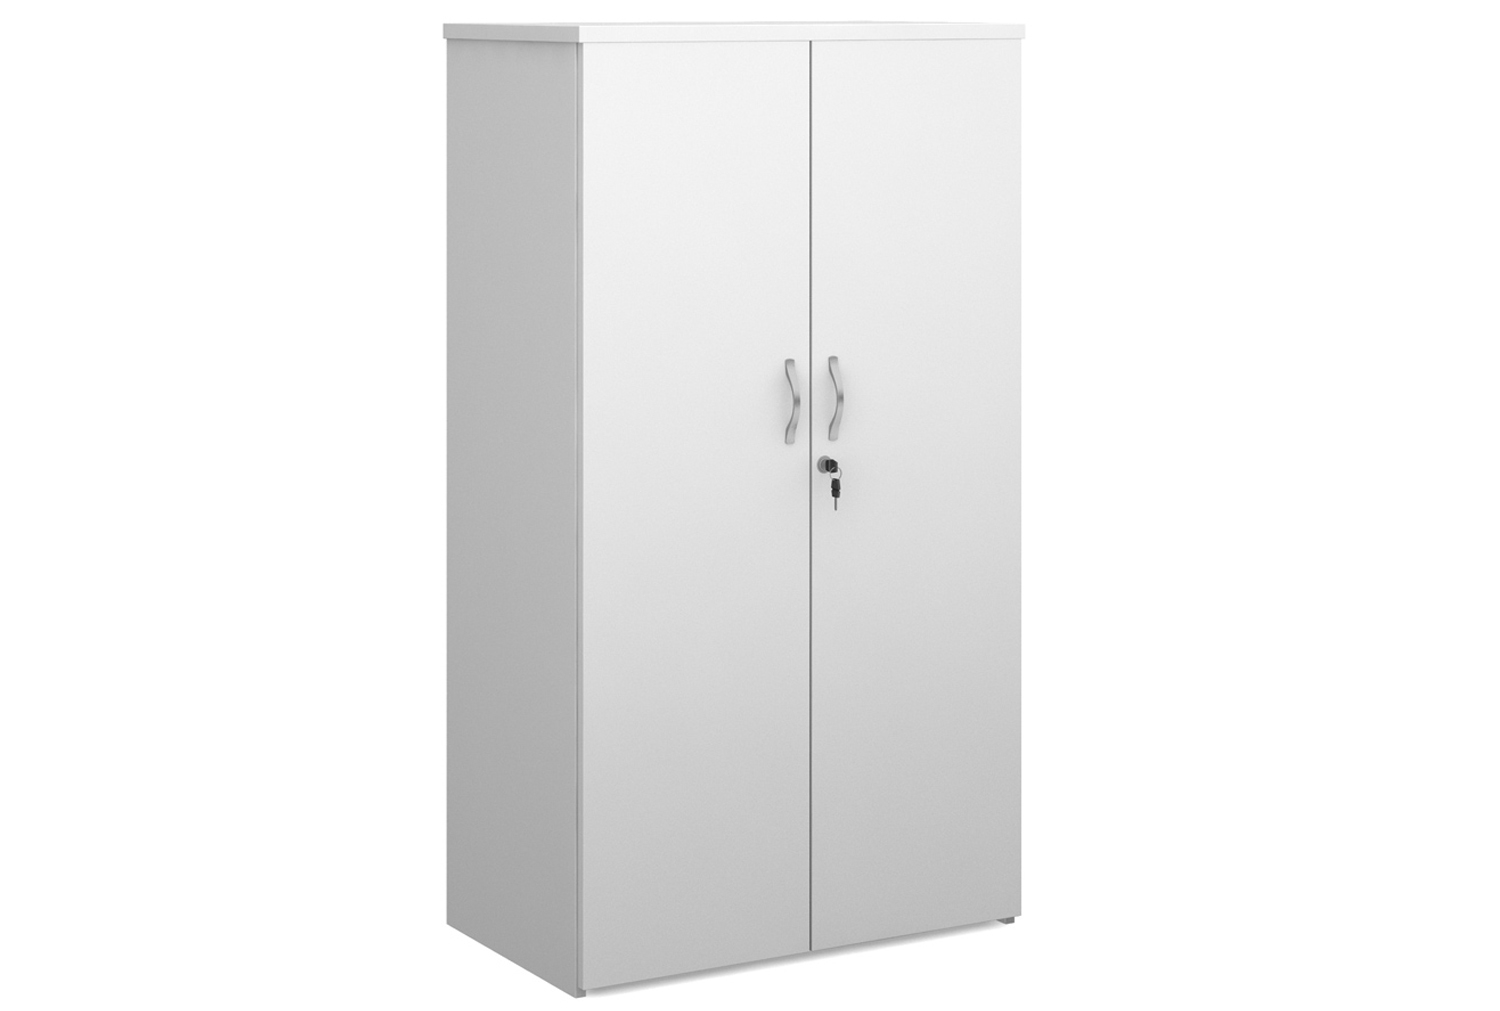 All White Cupboard, 3 Shelf - 80wx47dx144h (cm), Fully Installed